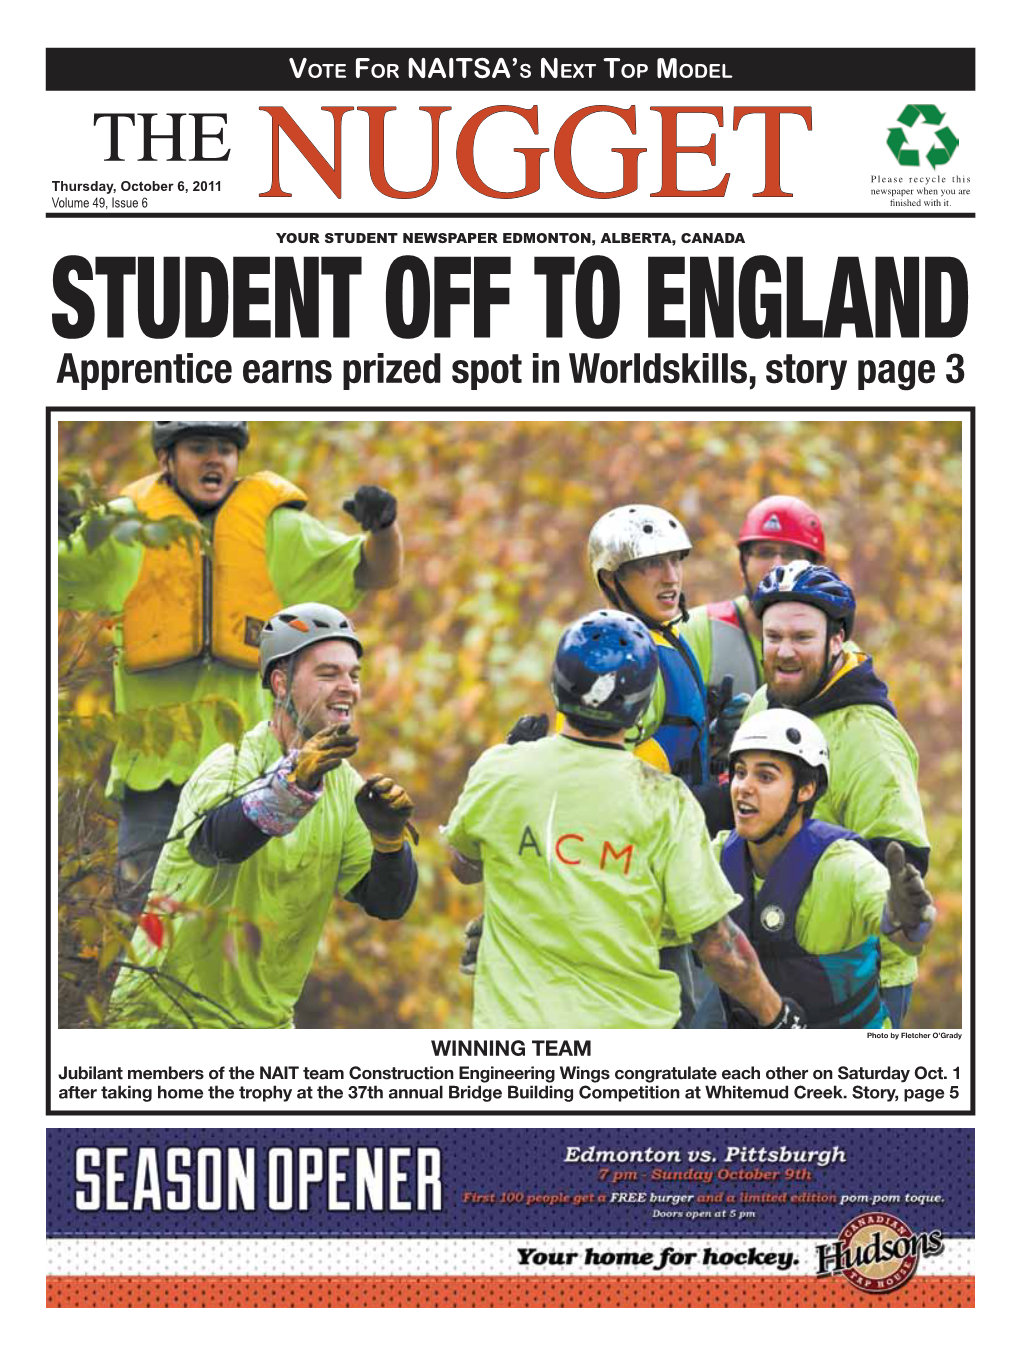 Apprentice Earns Prized Spot in Worldskills, Story Page 3